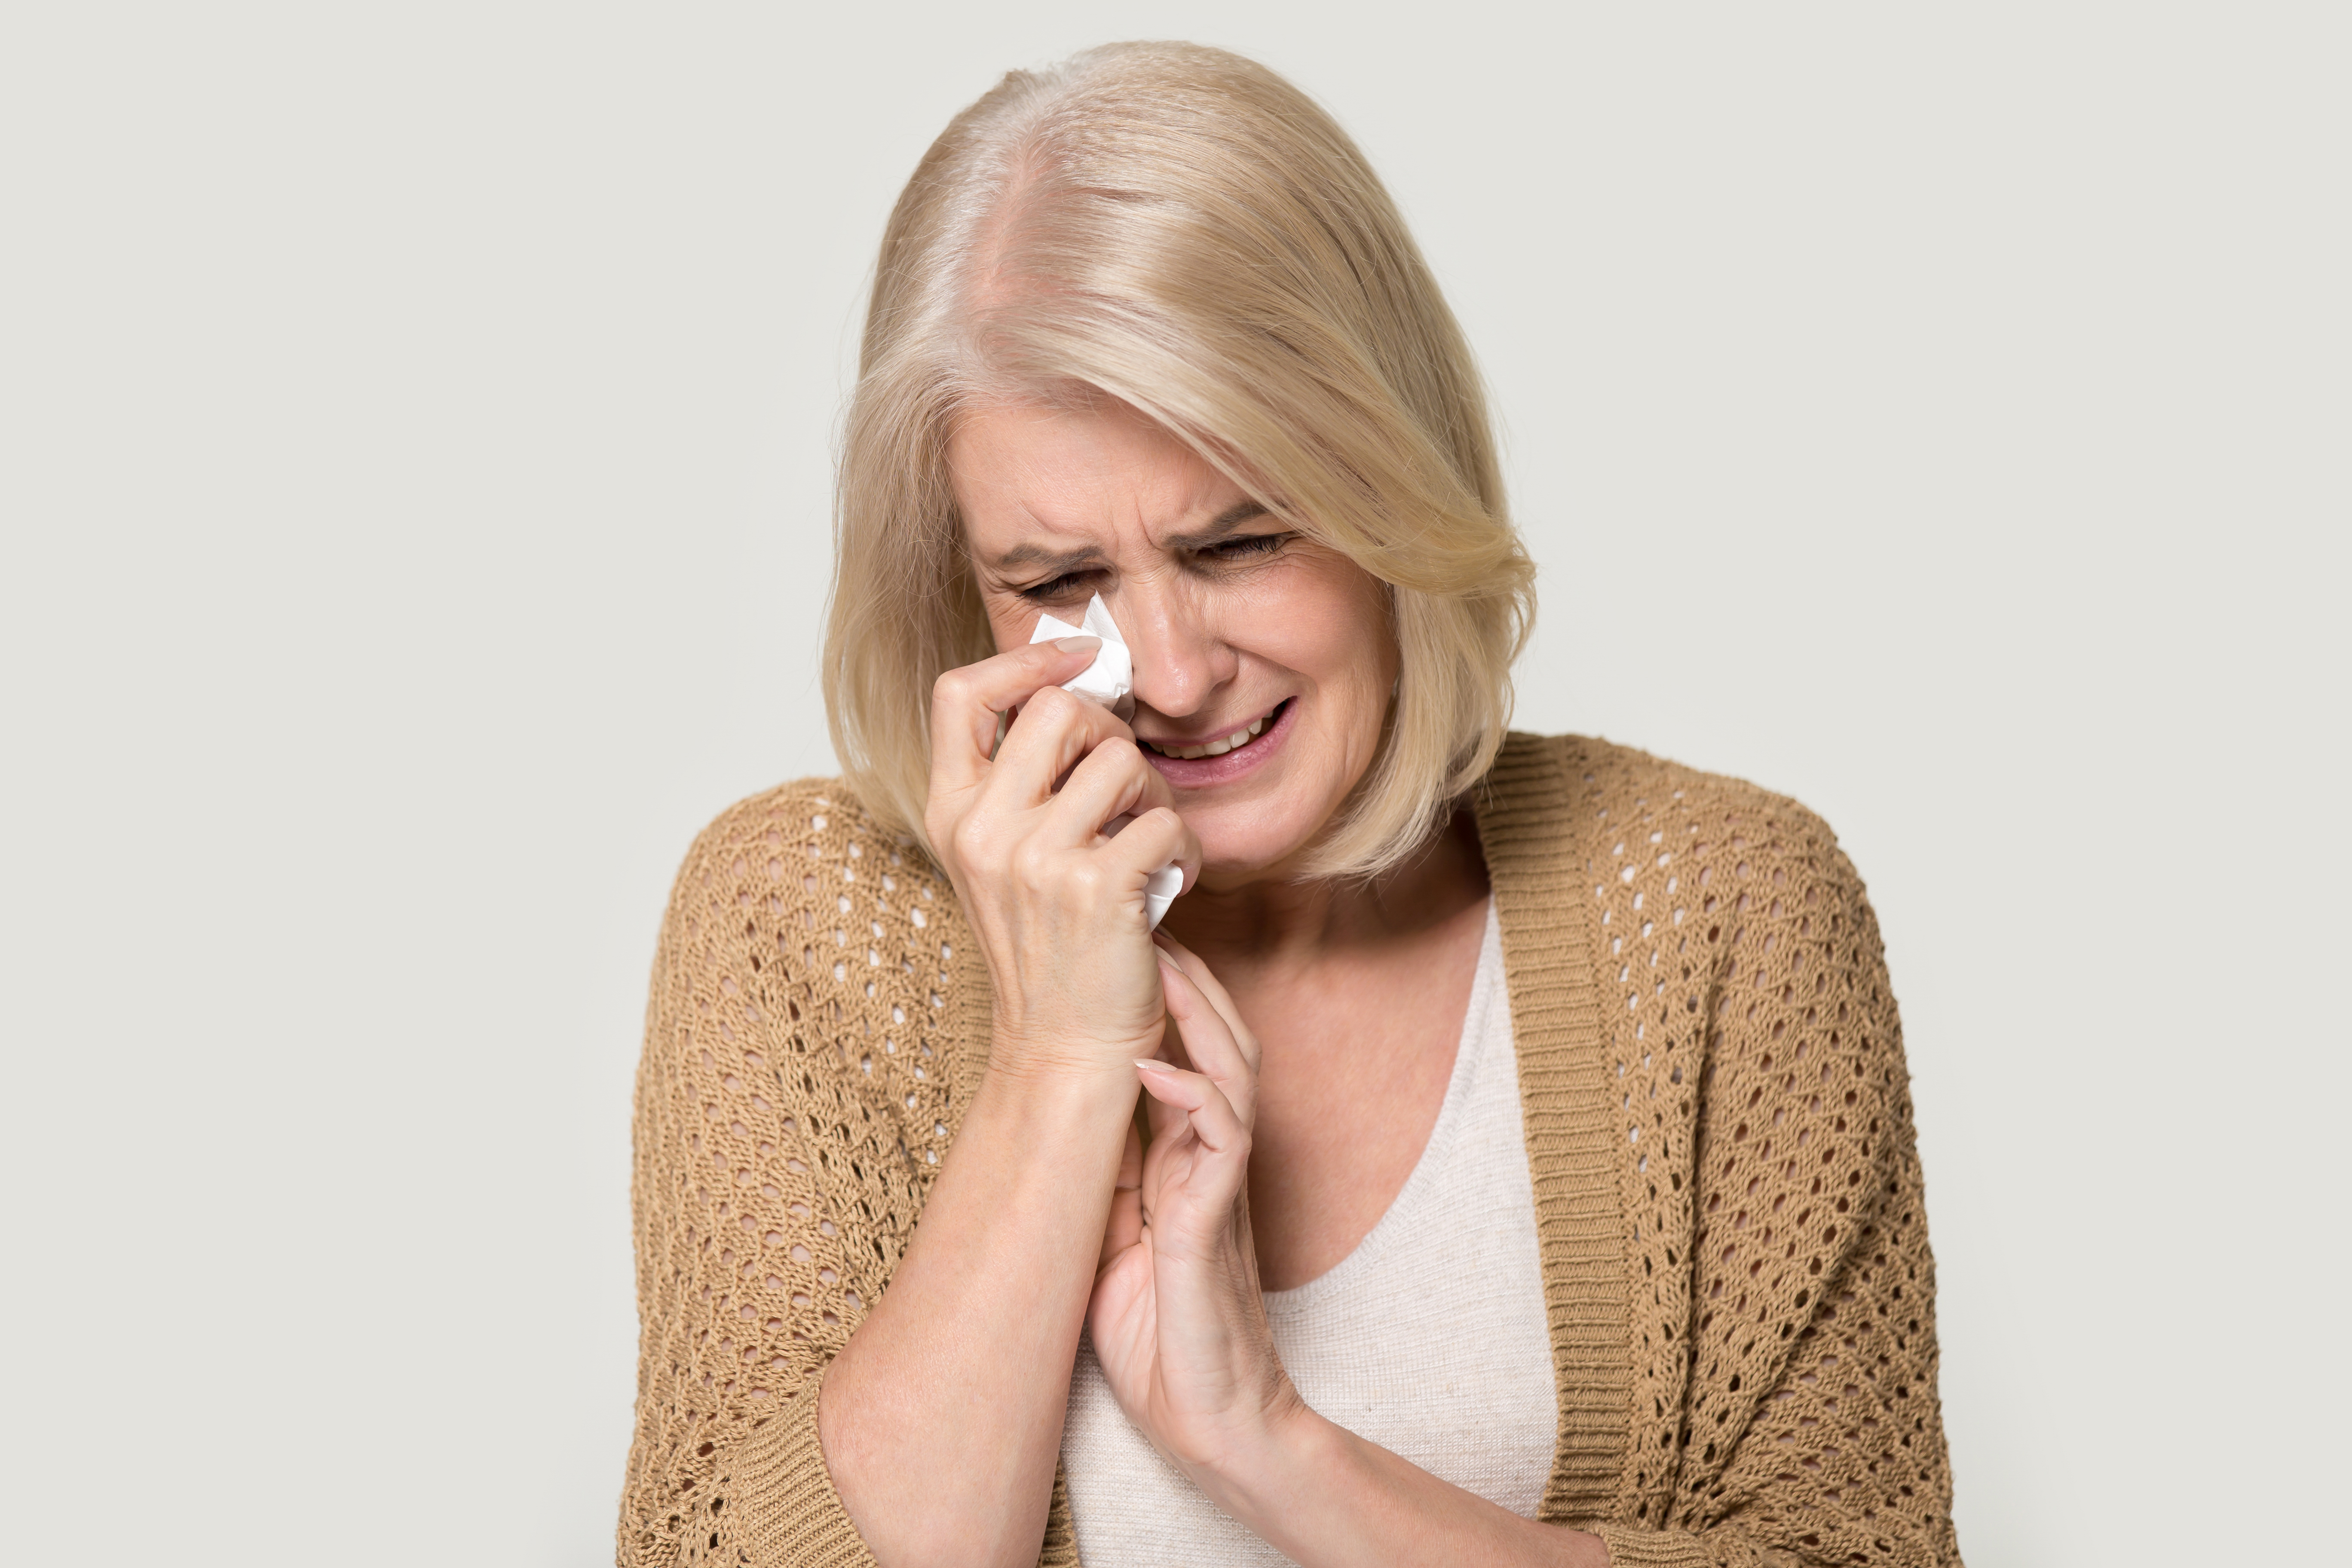 A crying senior lady wiping tears with her handkerchief | Source: Shutterstock